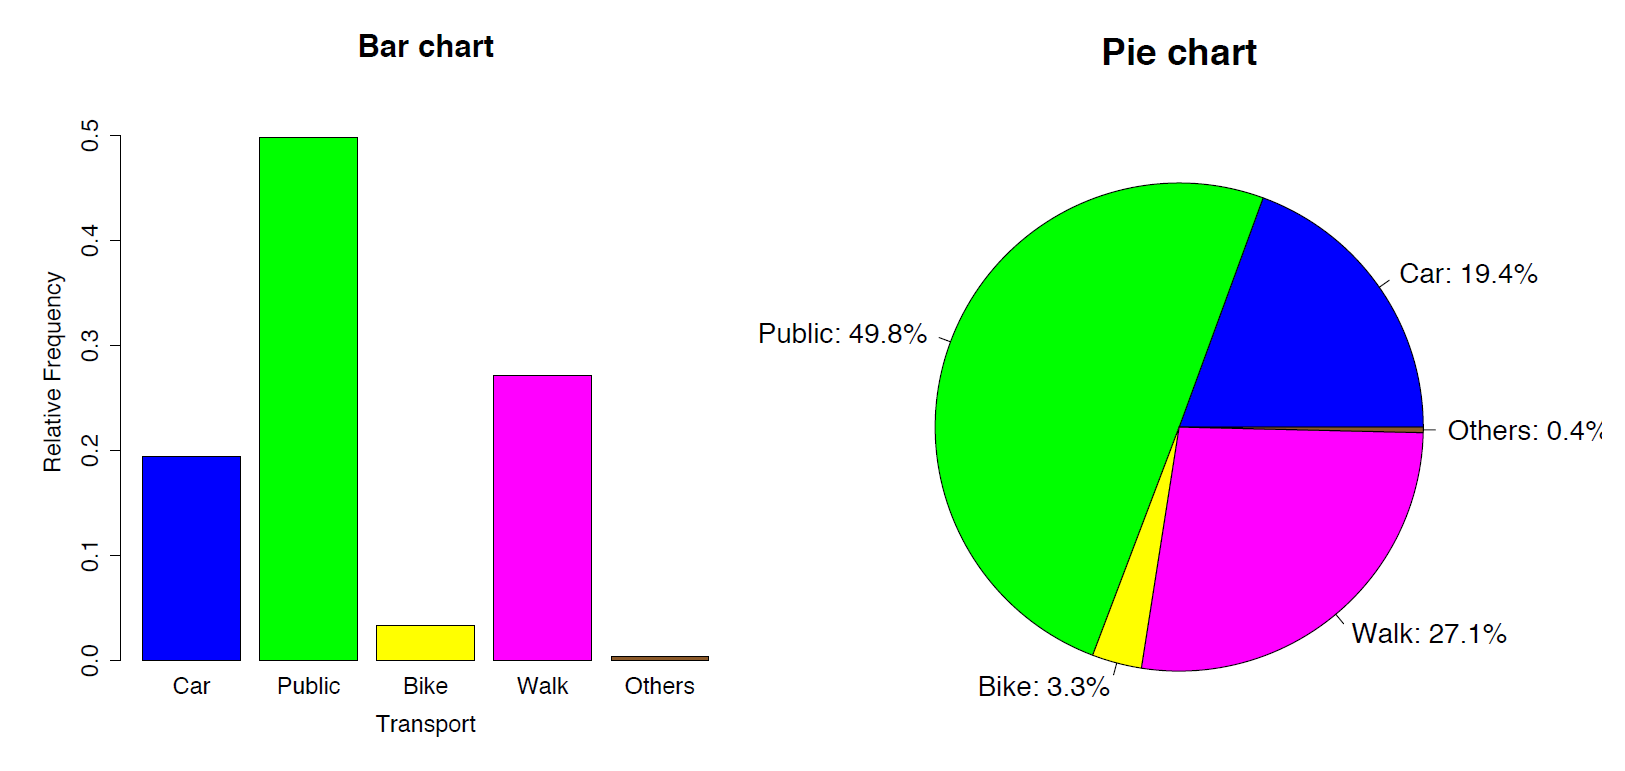 A bar graph on the left panel showing relative frequency of how students came to school. A pie chart on the right panel showing percentages of how students came to school. Image description available.